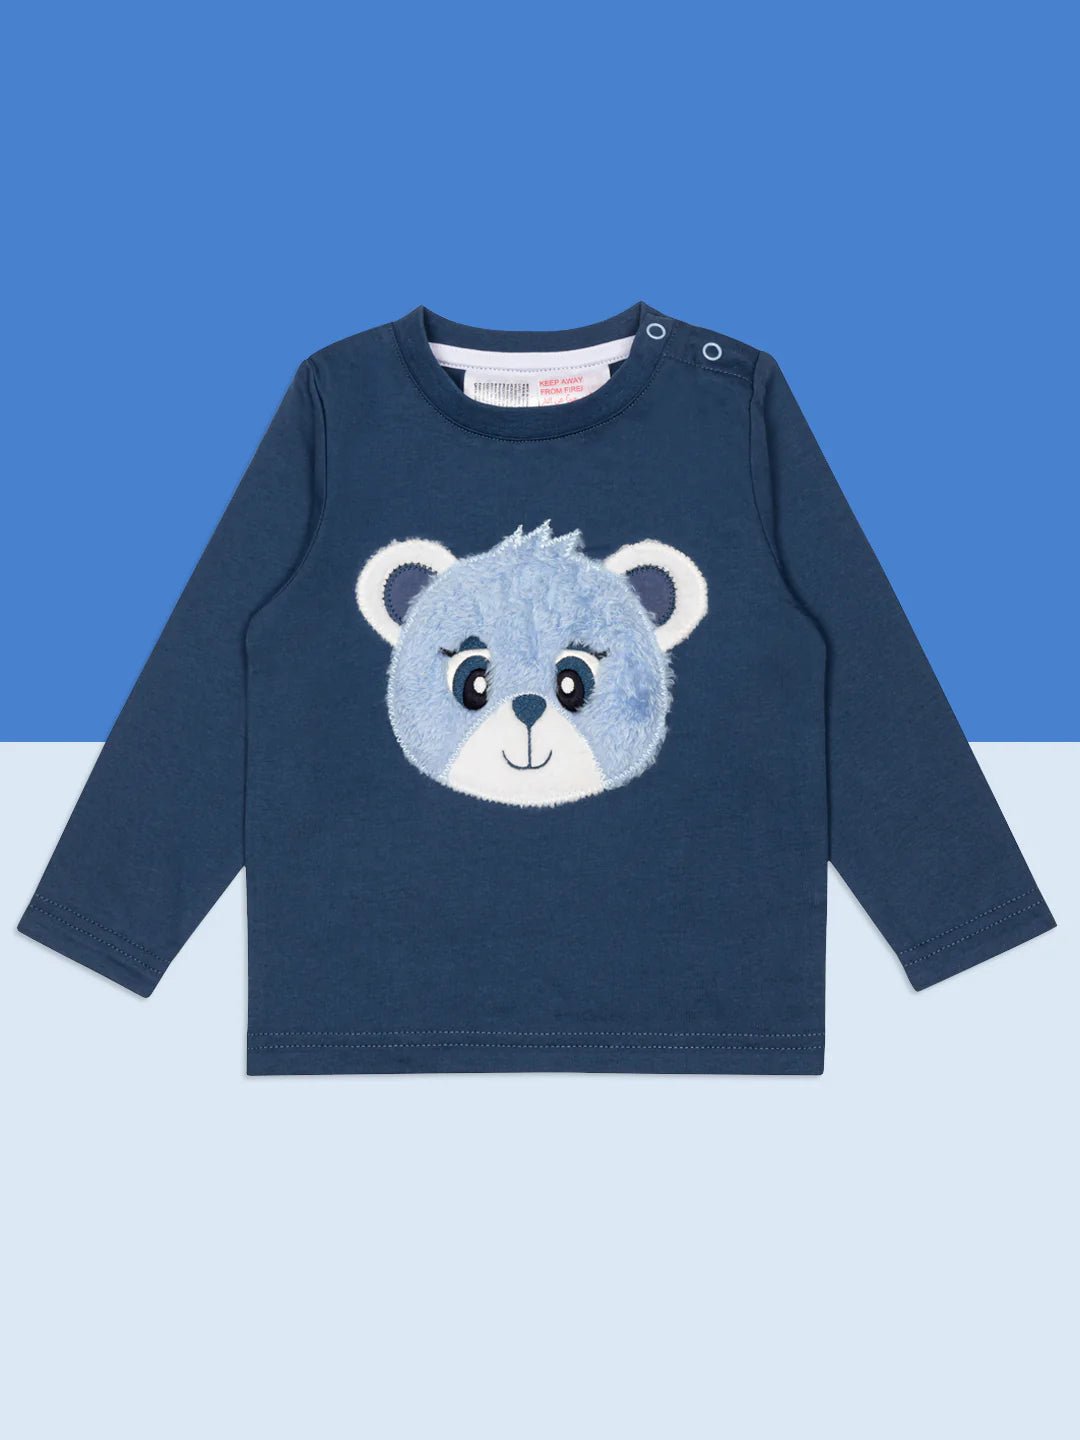 Preston the Bear Top by Blade & Rose